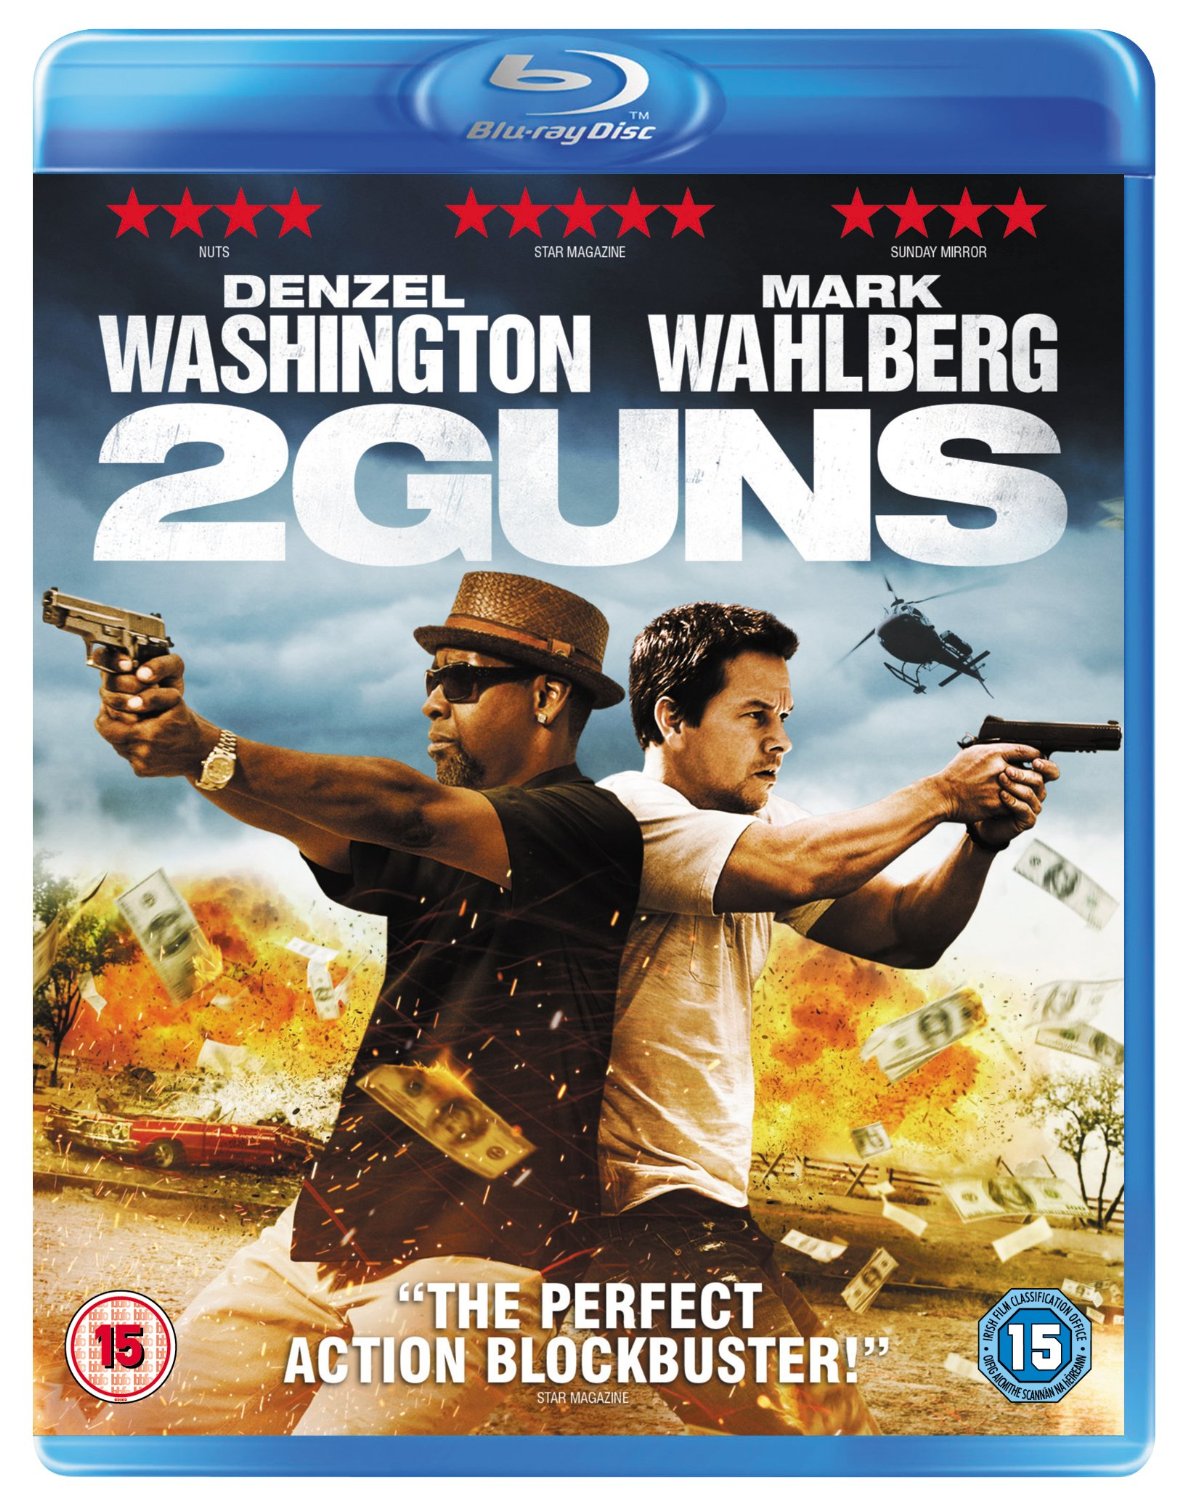 boom competitions - win a copy of 2 Guns on Blu-ray and other prizes